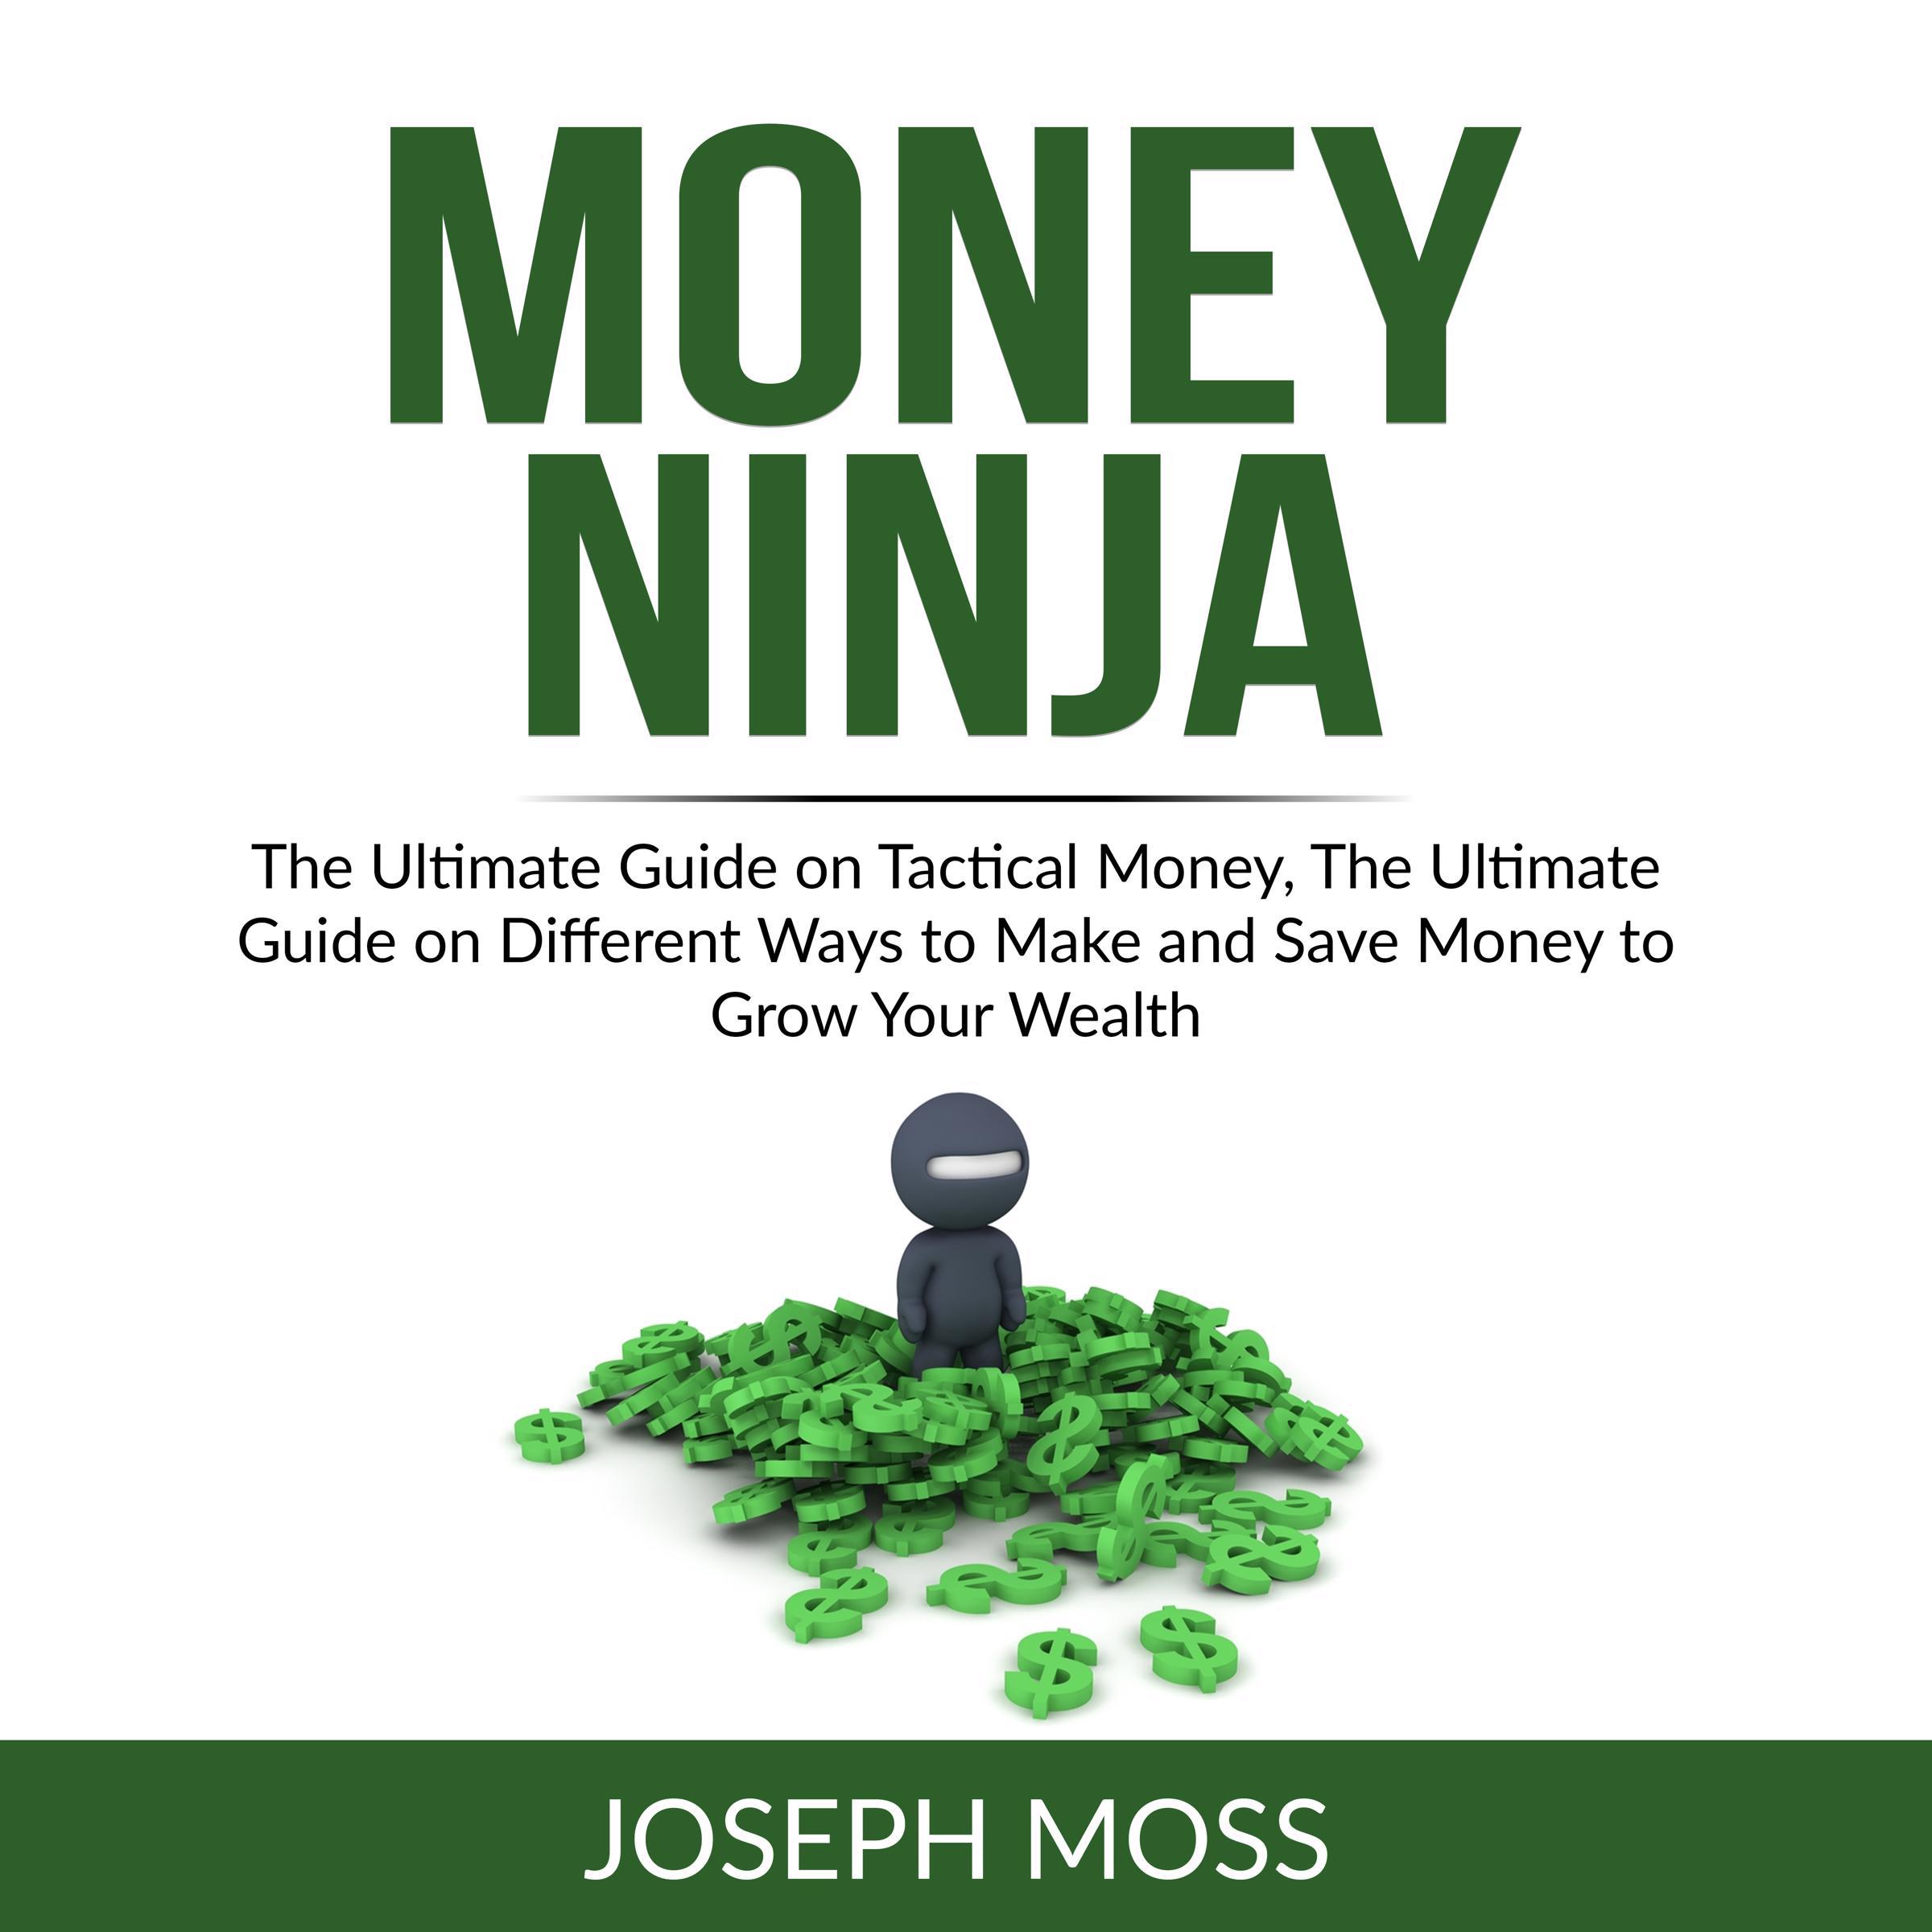 Money Ninja: The Ultimate Guide on Tactical Money, The Ultimate Guide on Different Ways to Make and Save Money to Grow Your Wealth